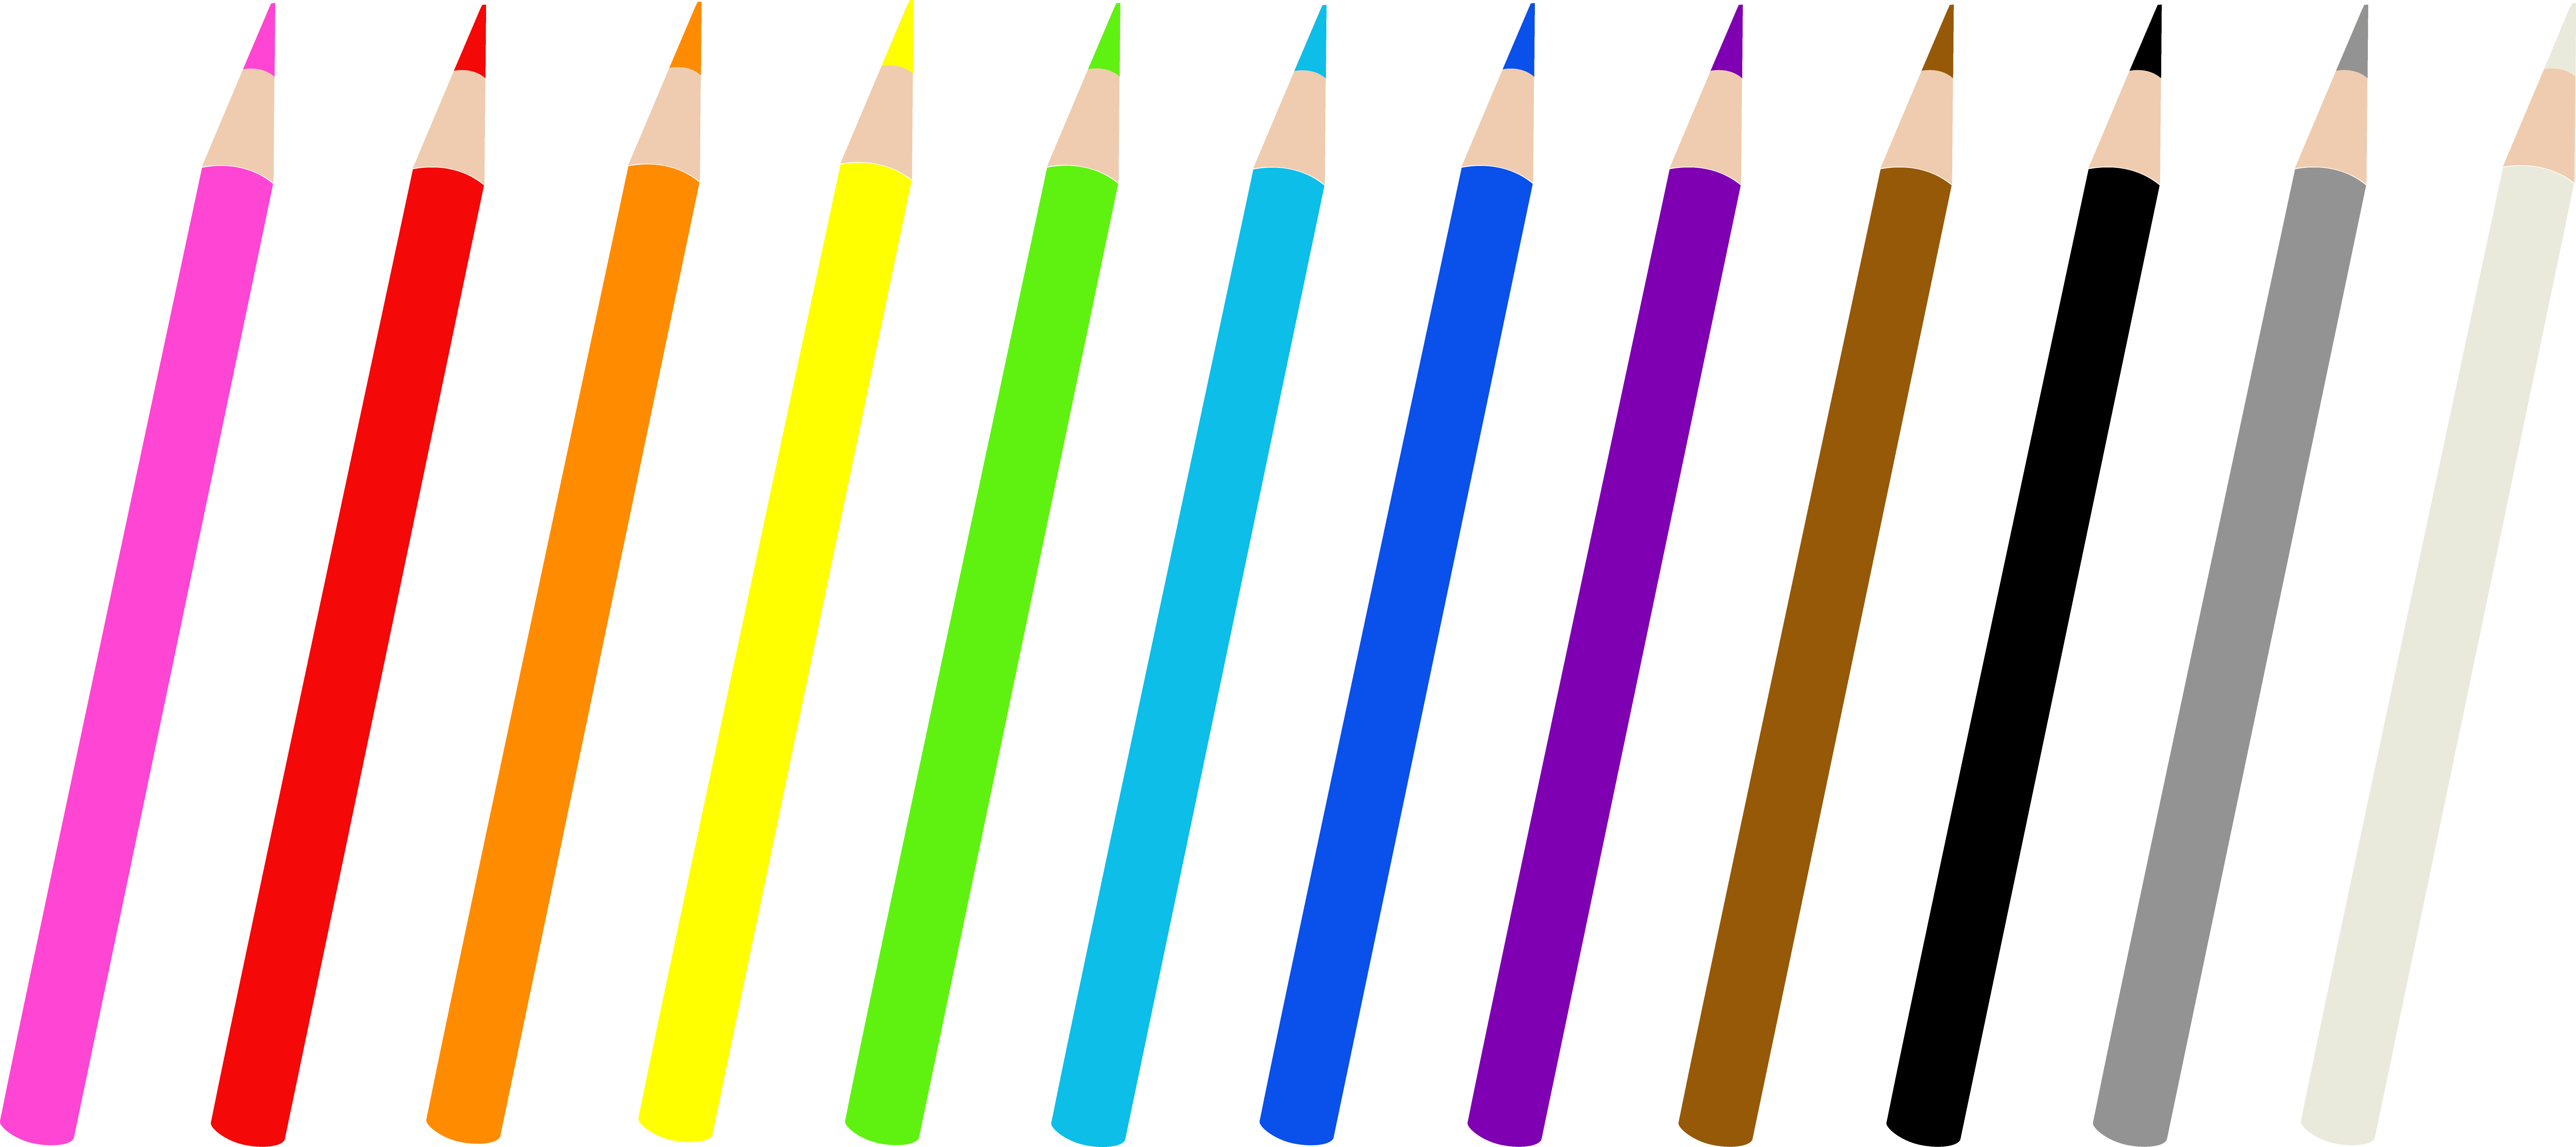 Color art yahoo image. Writer clipart pencil